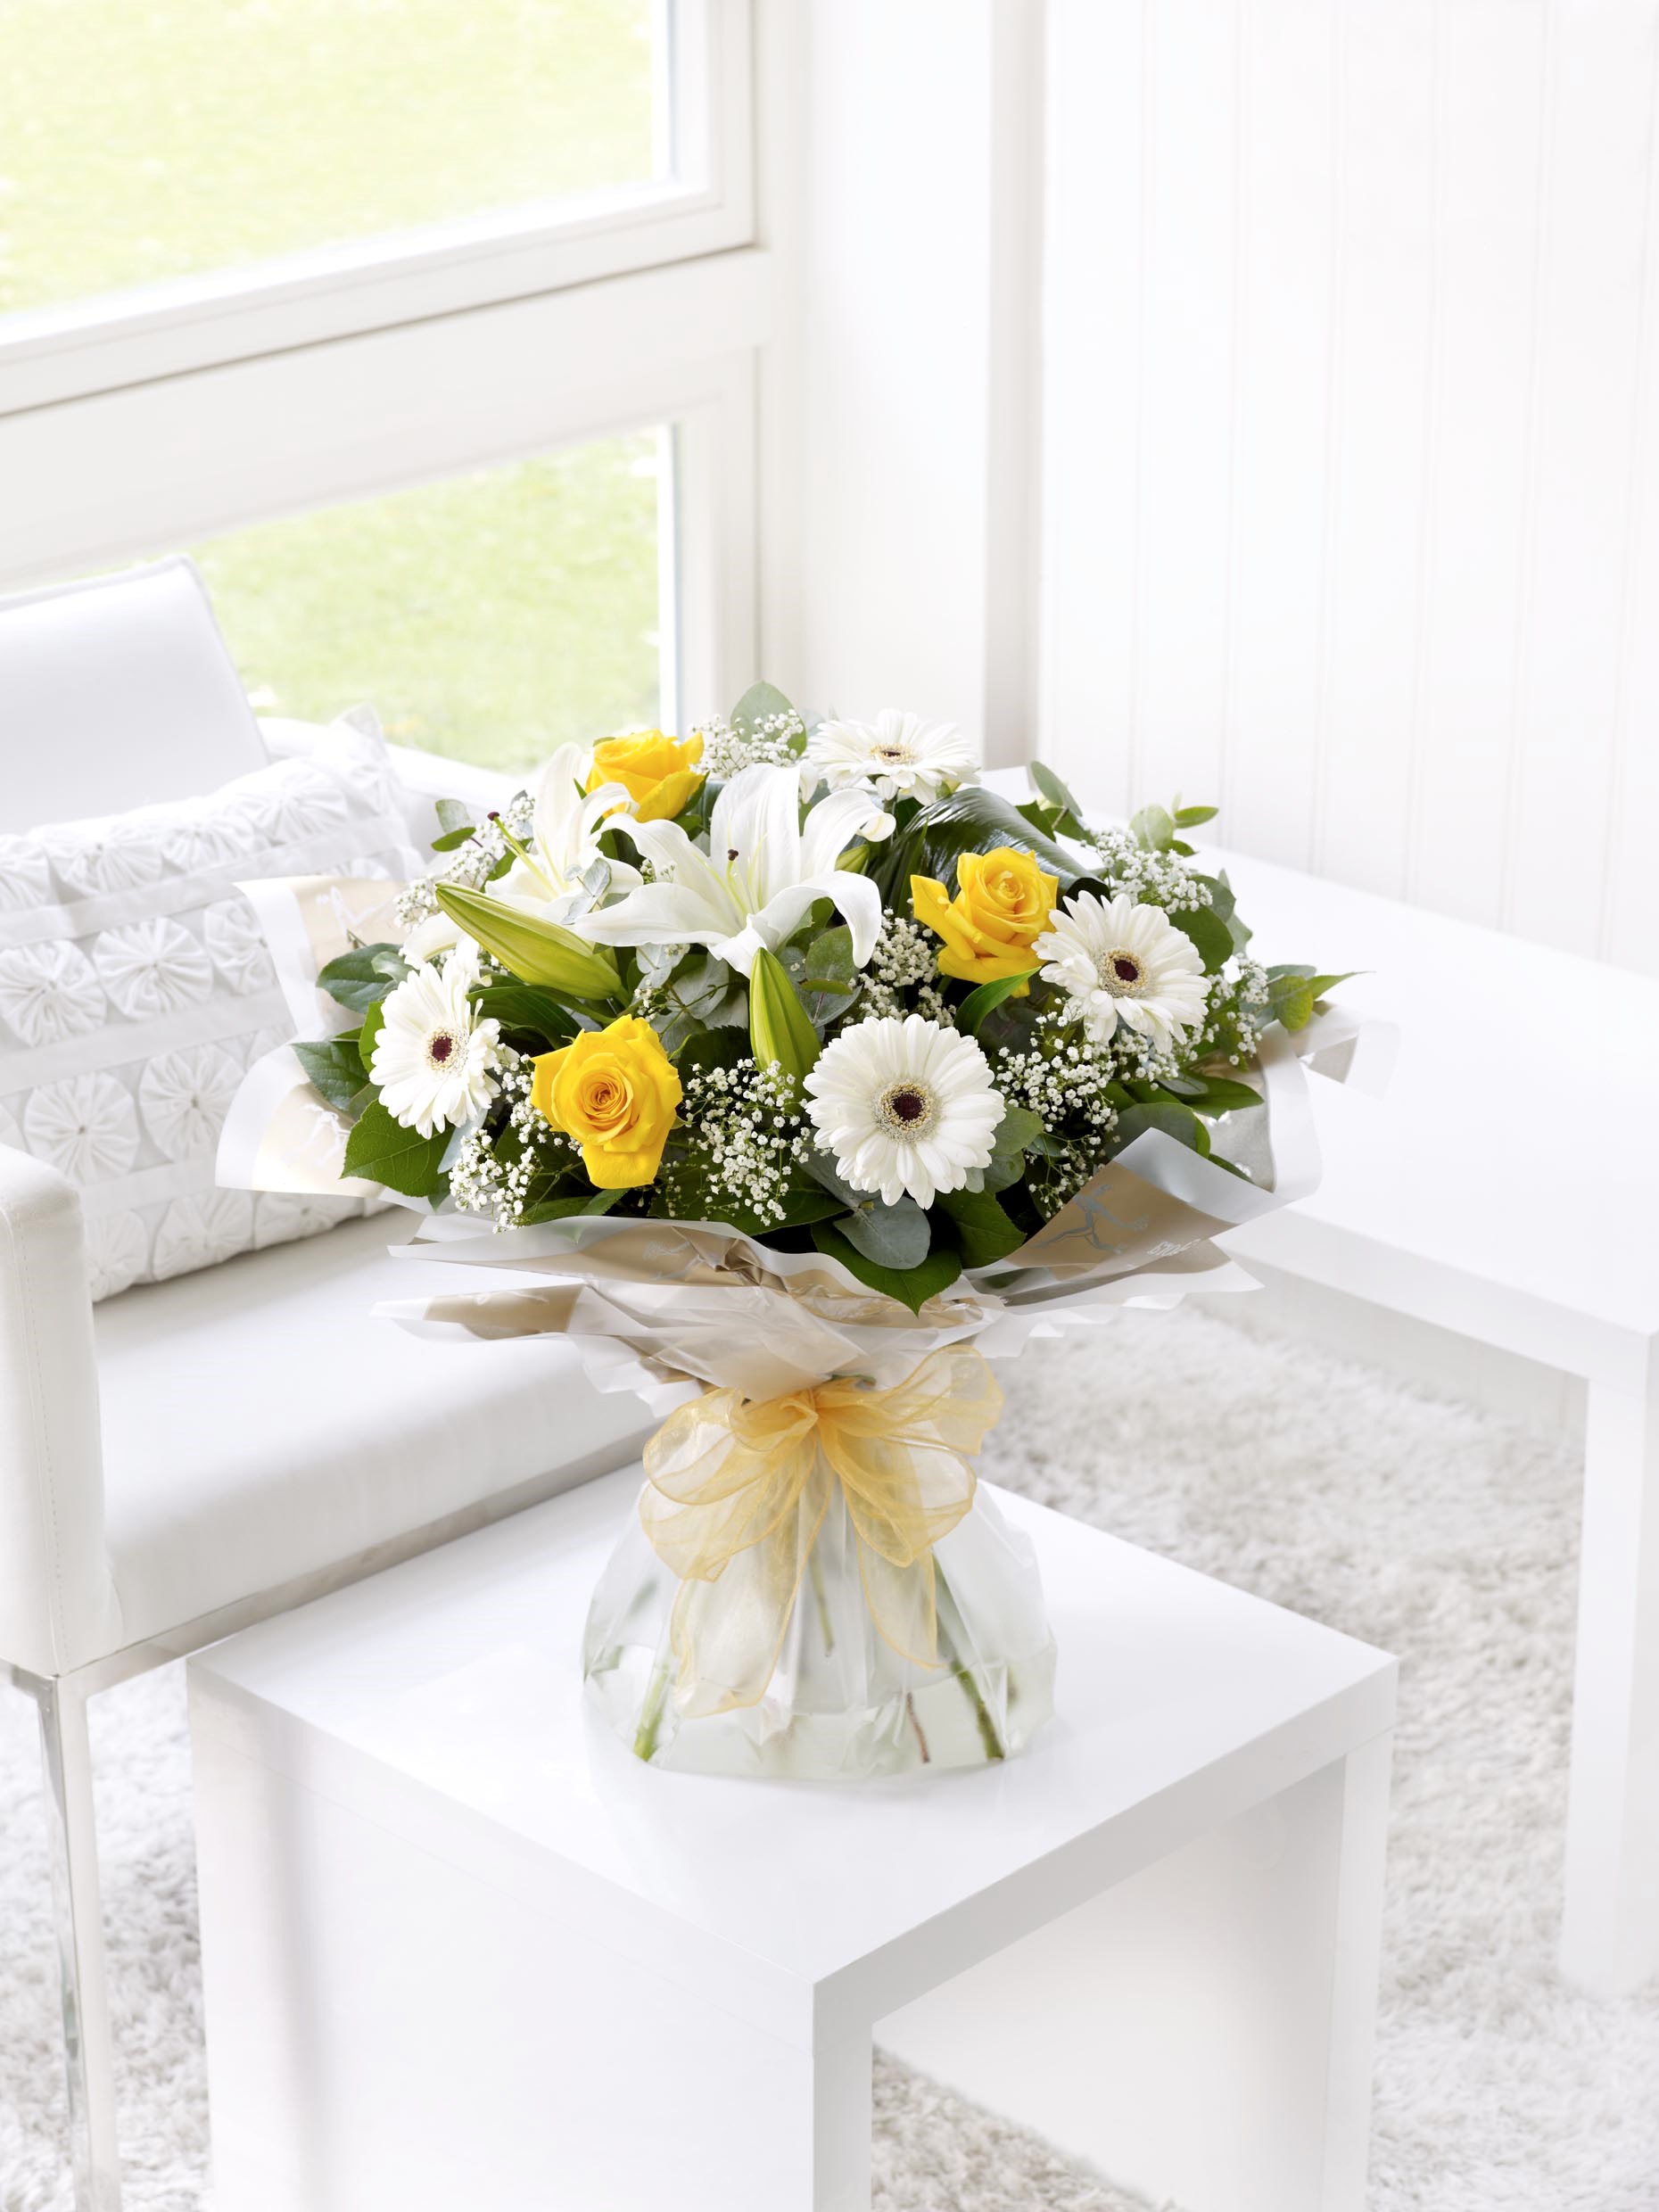 Yellow and white hand-tied